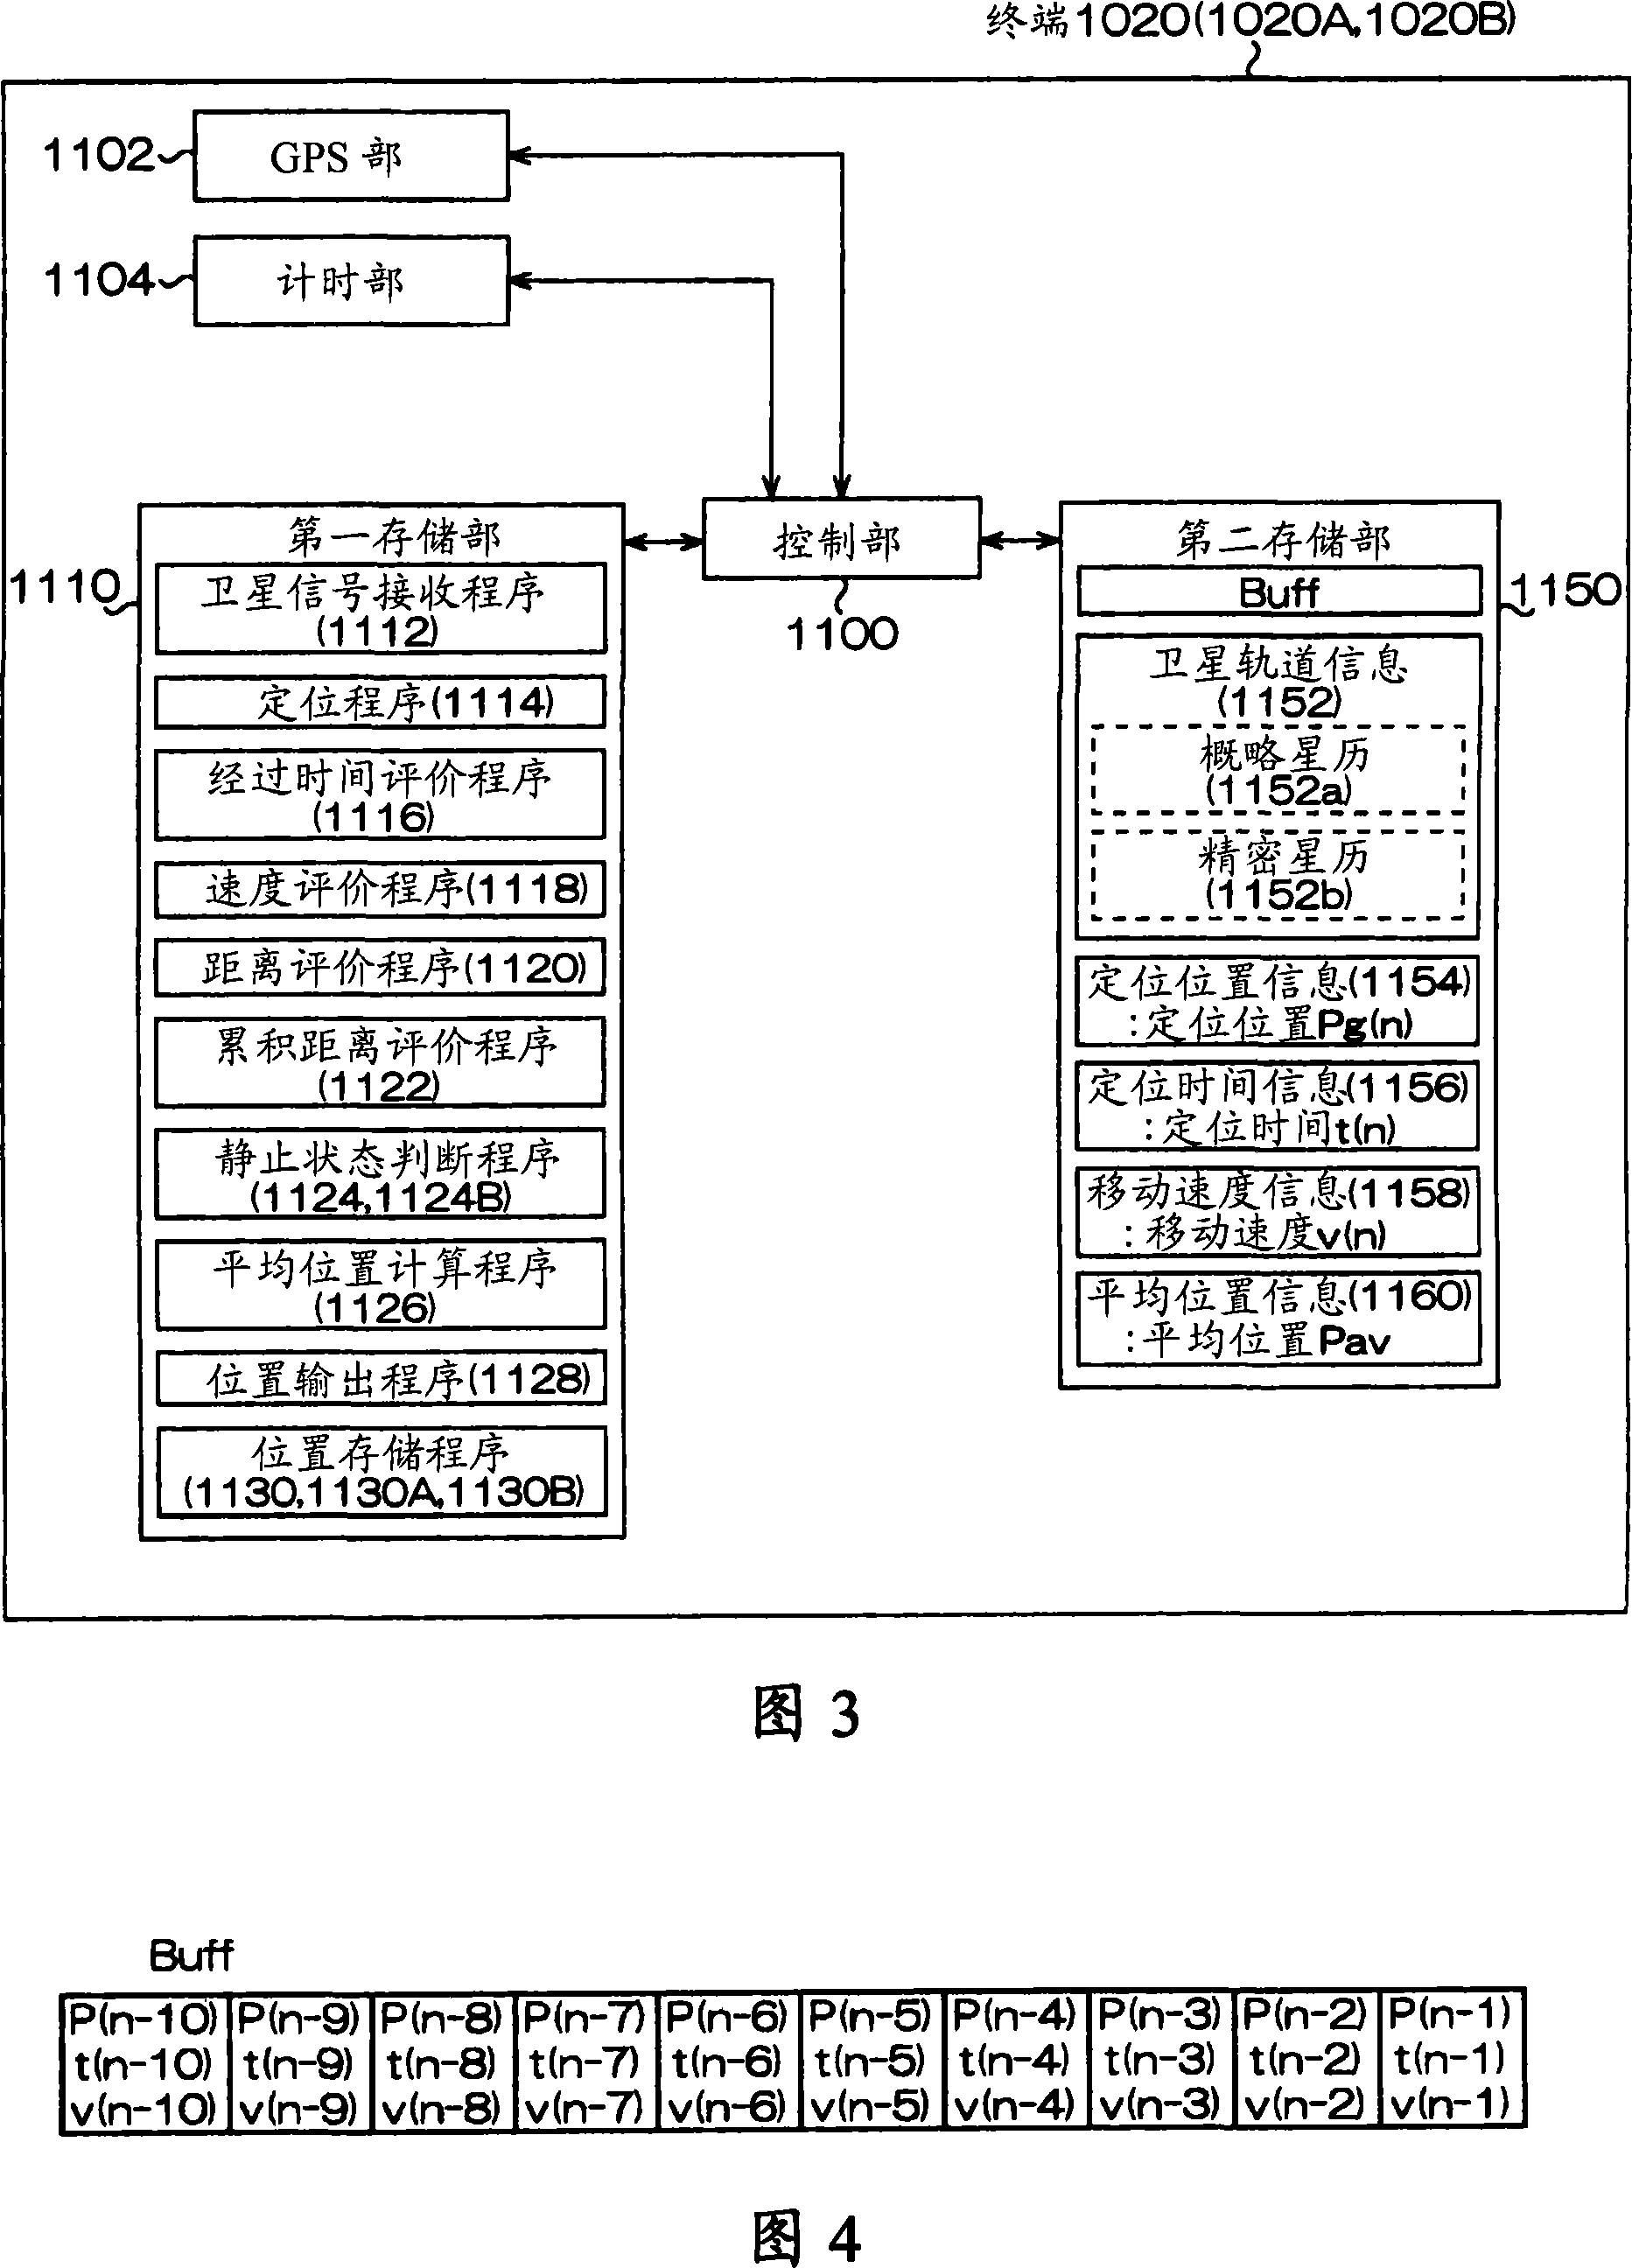 Positioning device, method of controlling positioning device